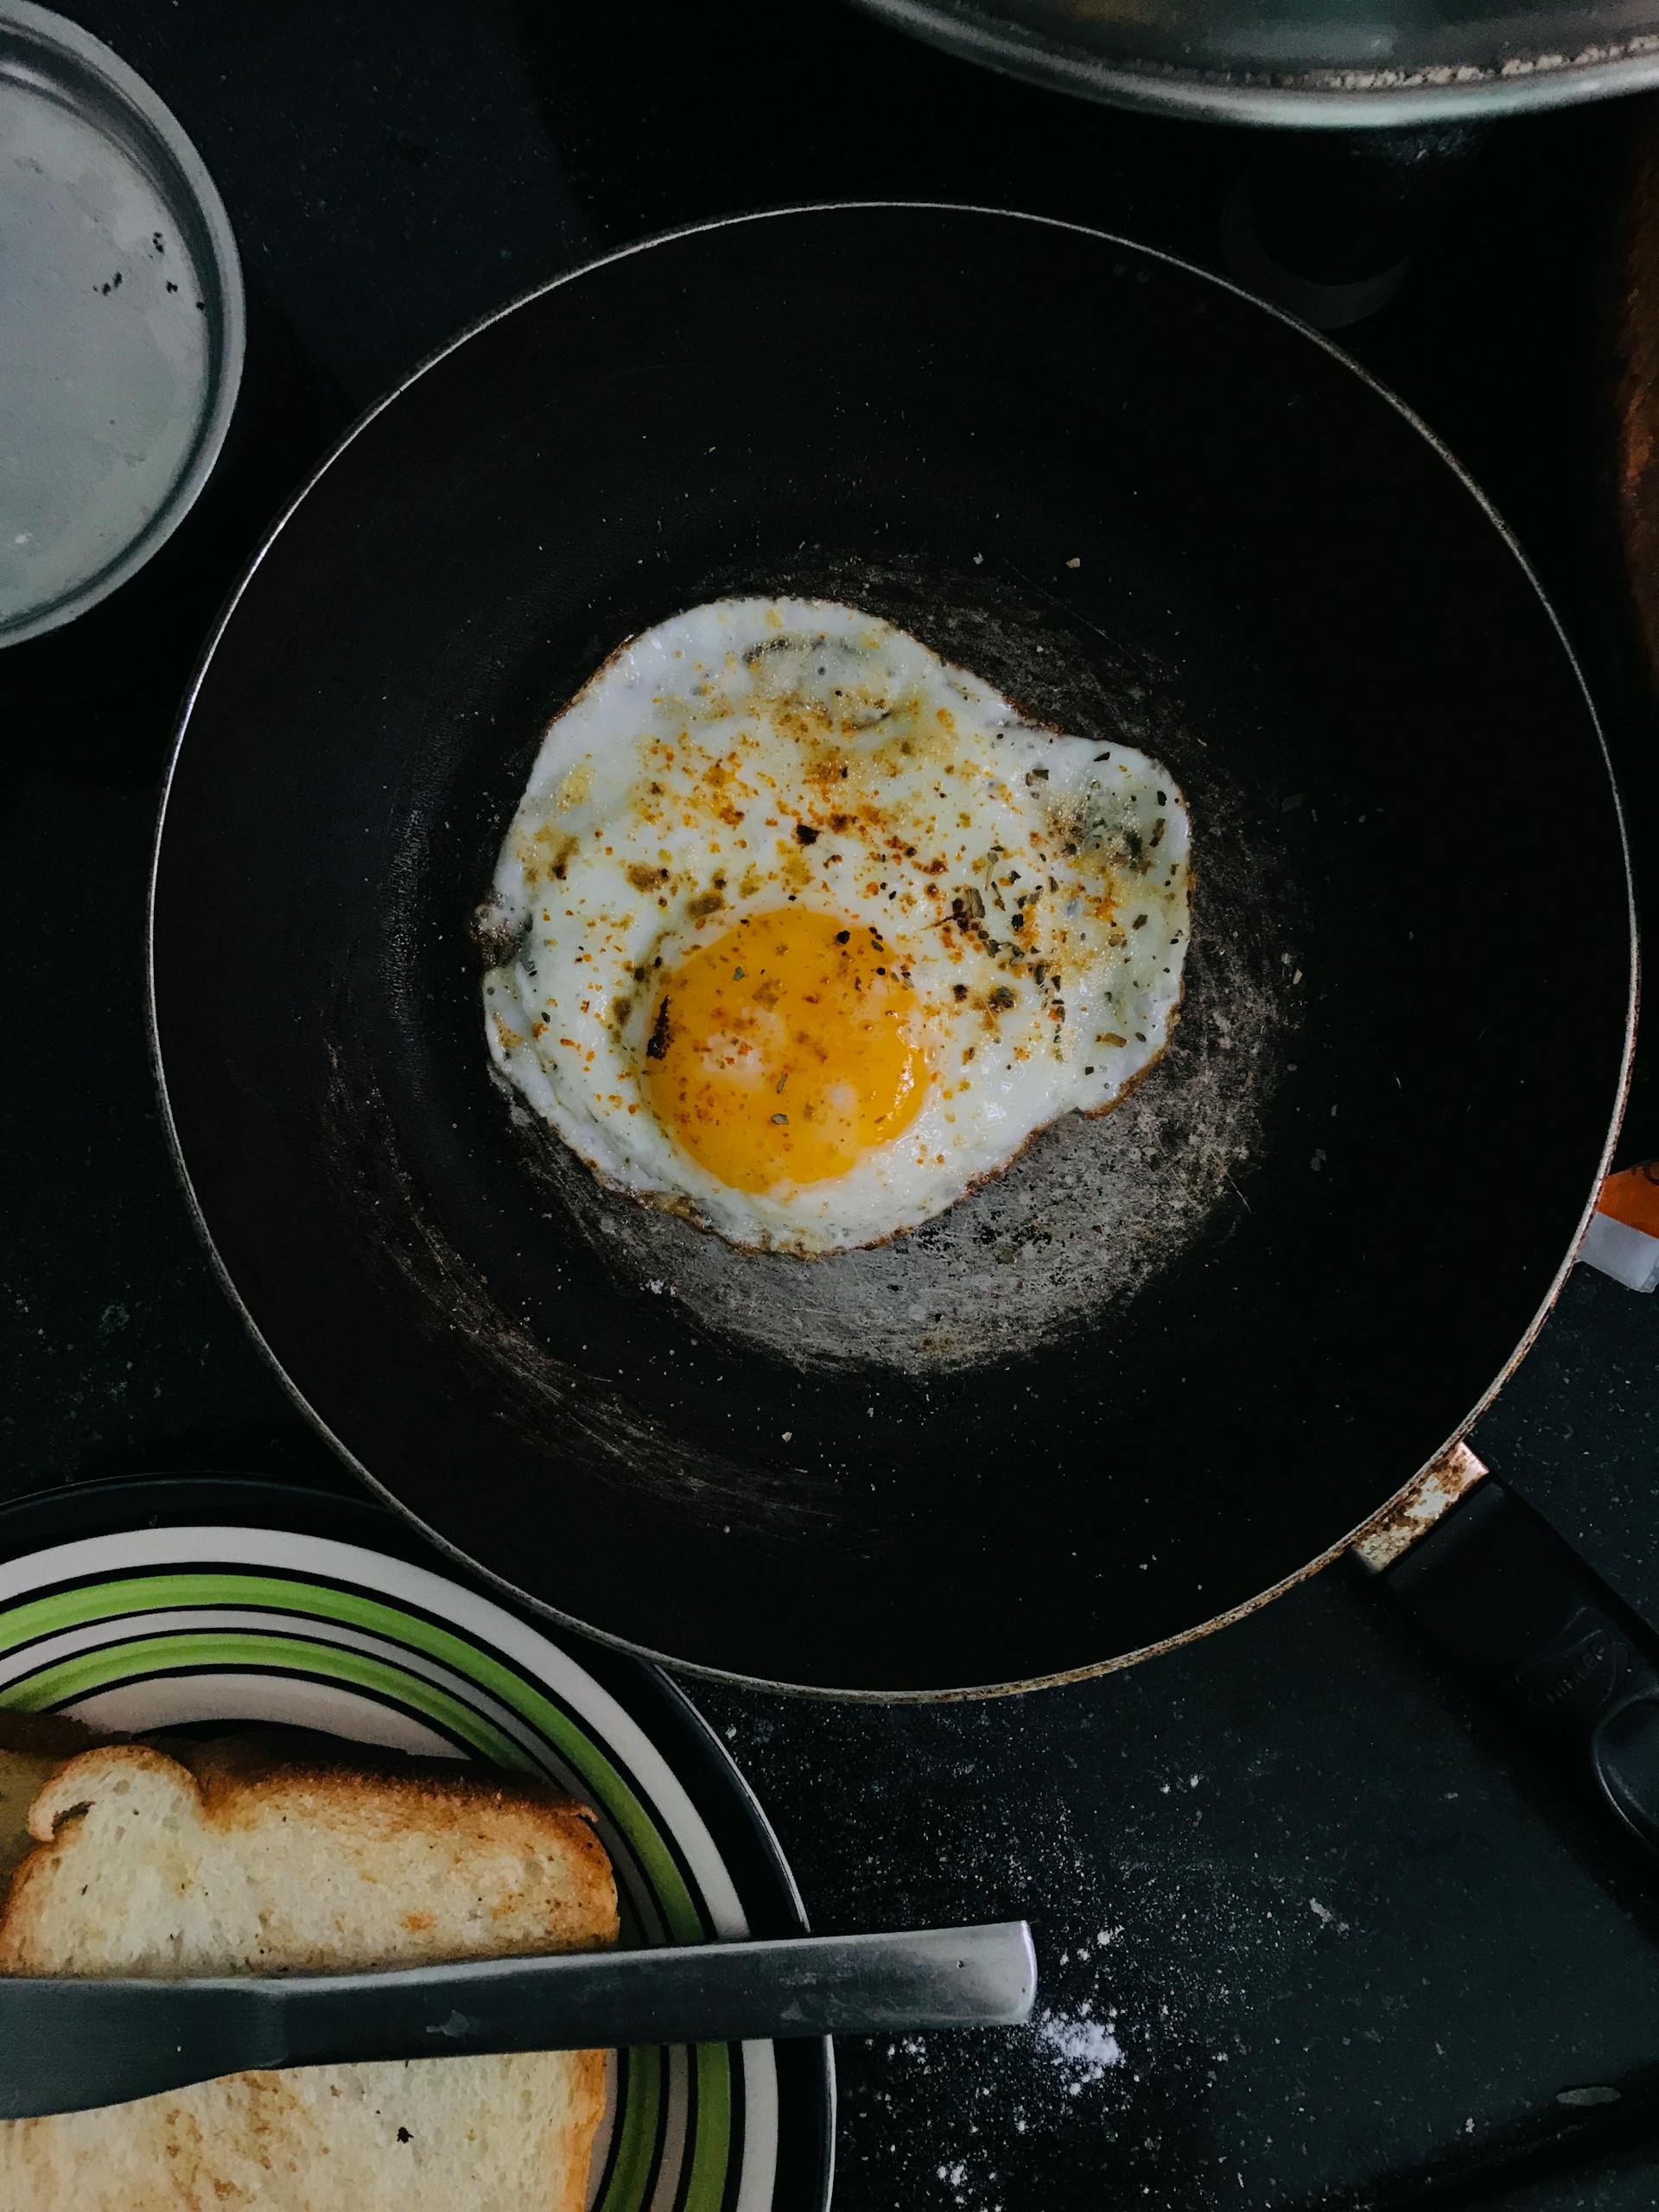 A egg being cooked in a pan. For illustration purposes only | Source: Pexels